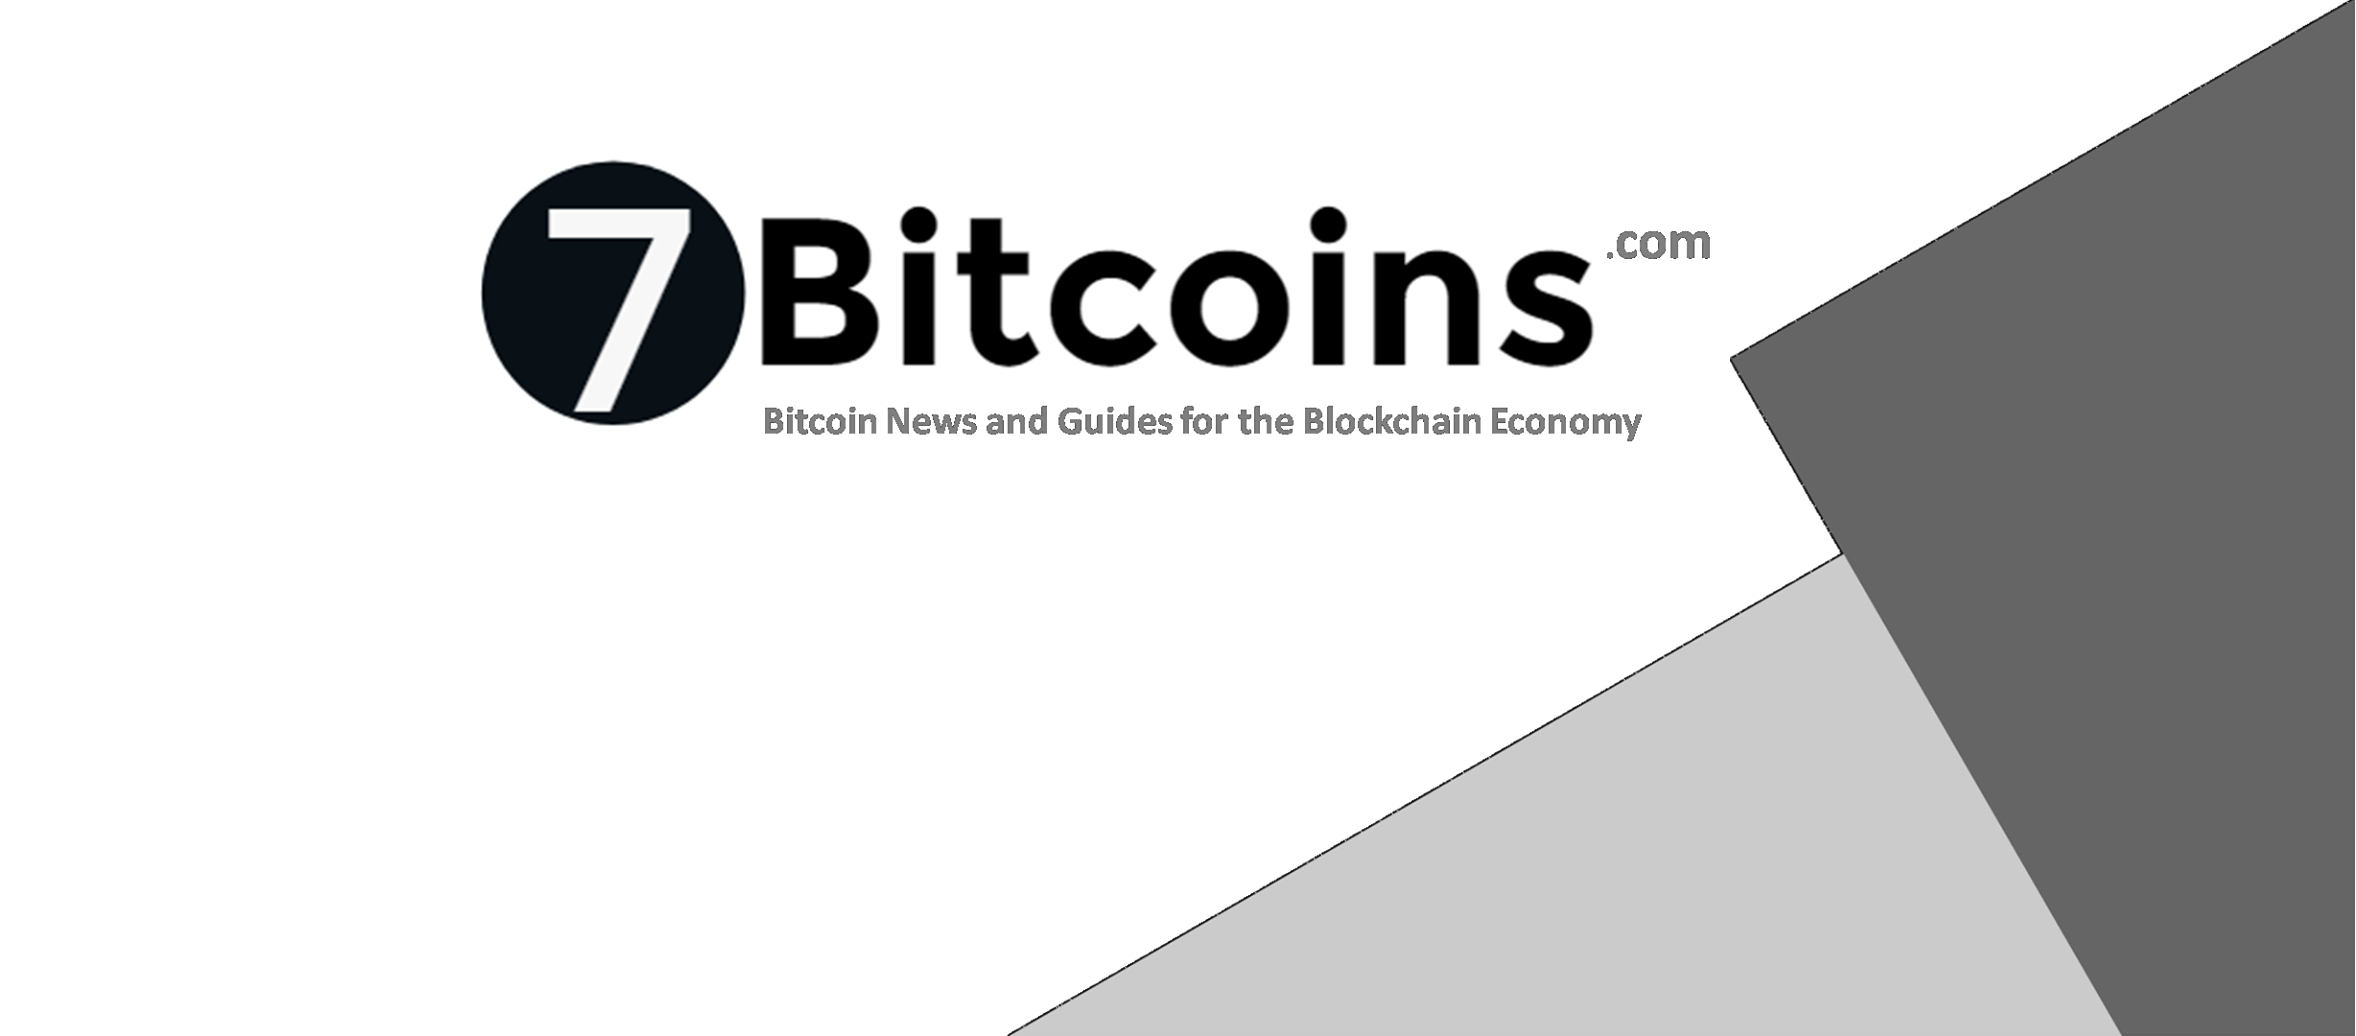 7Bitcoins - Cryptocurrency News, Analysis and Guides for the Blockchain Economy cover